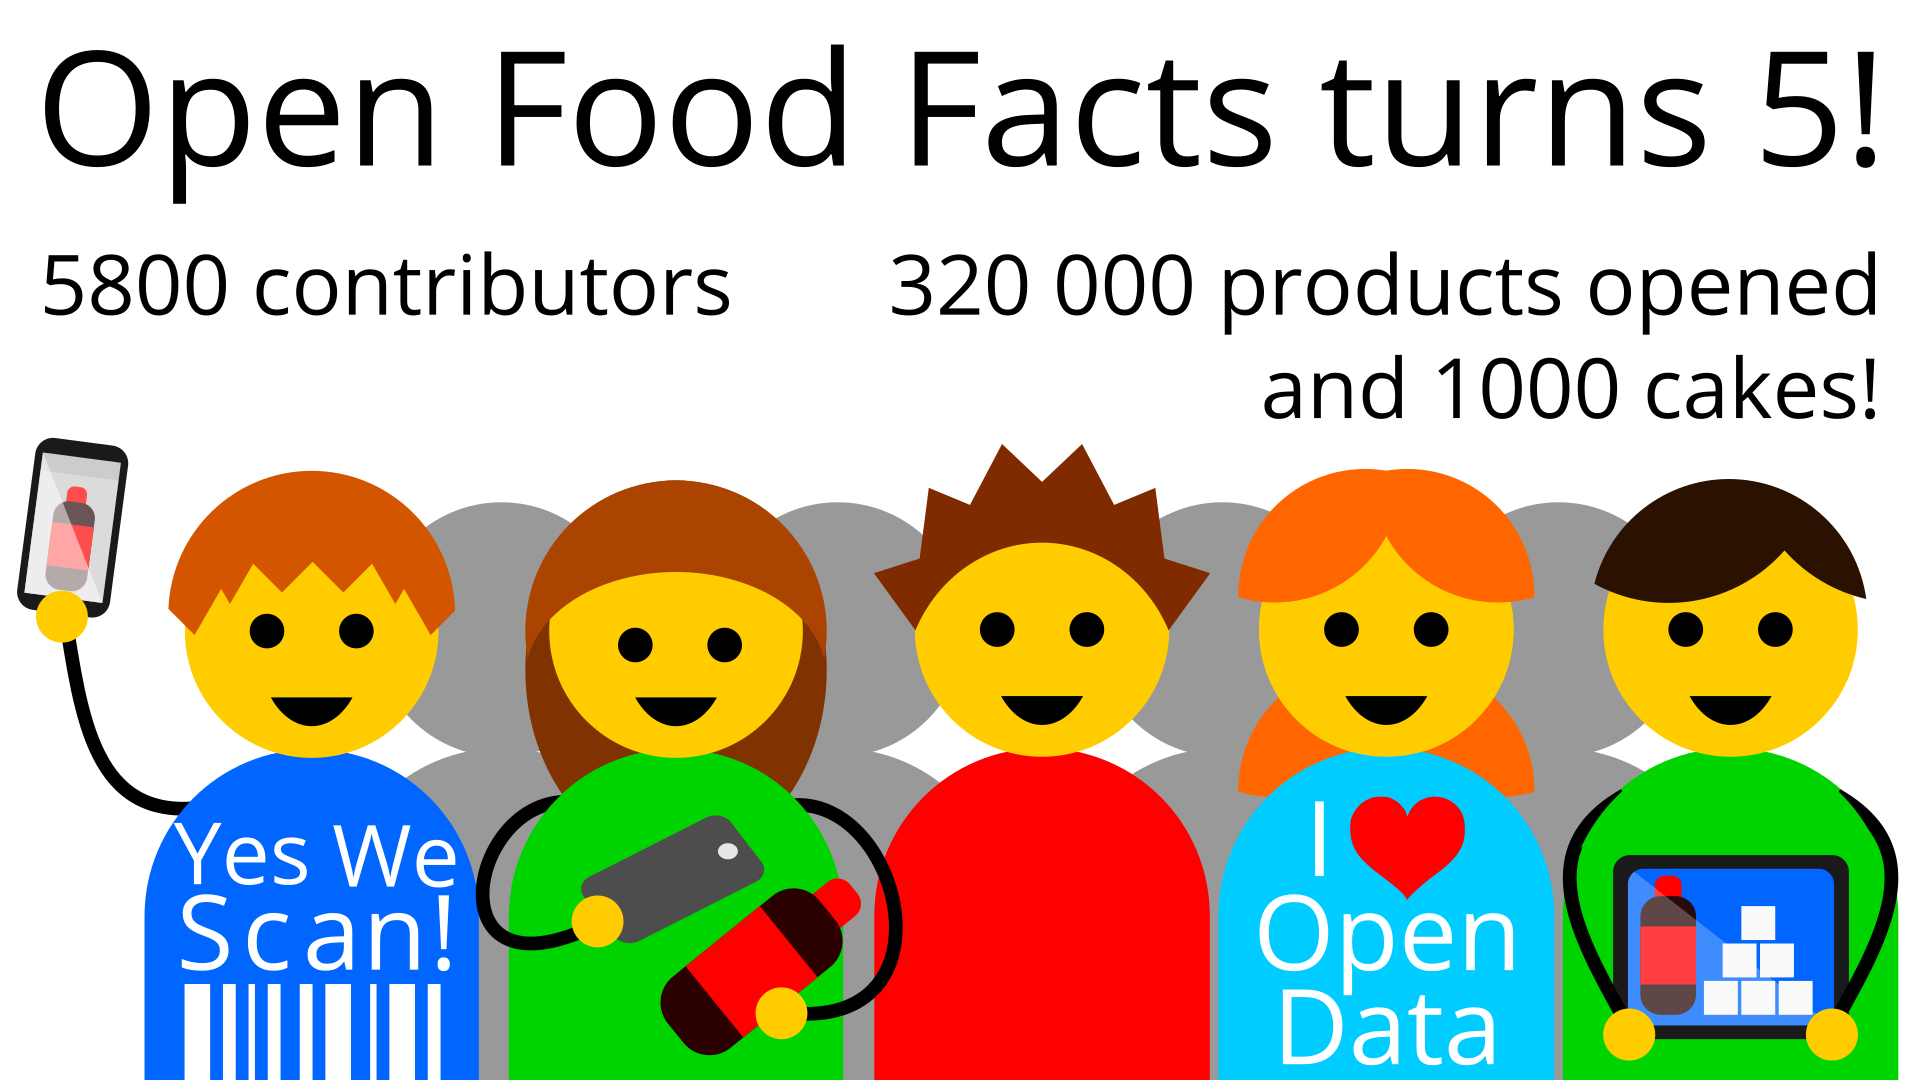 Open Food Facts turns 5!